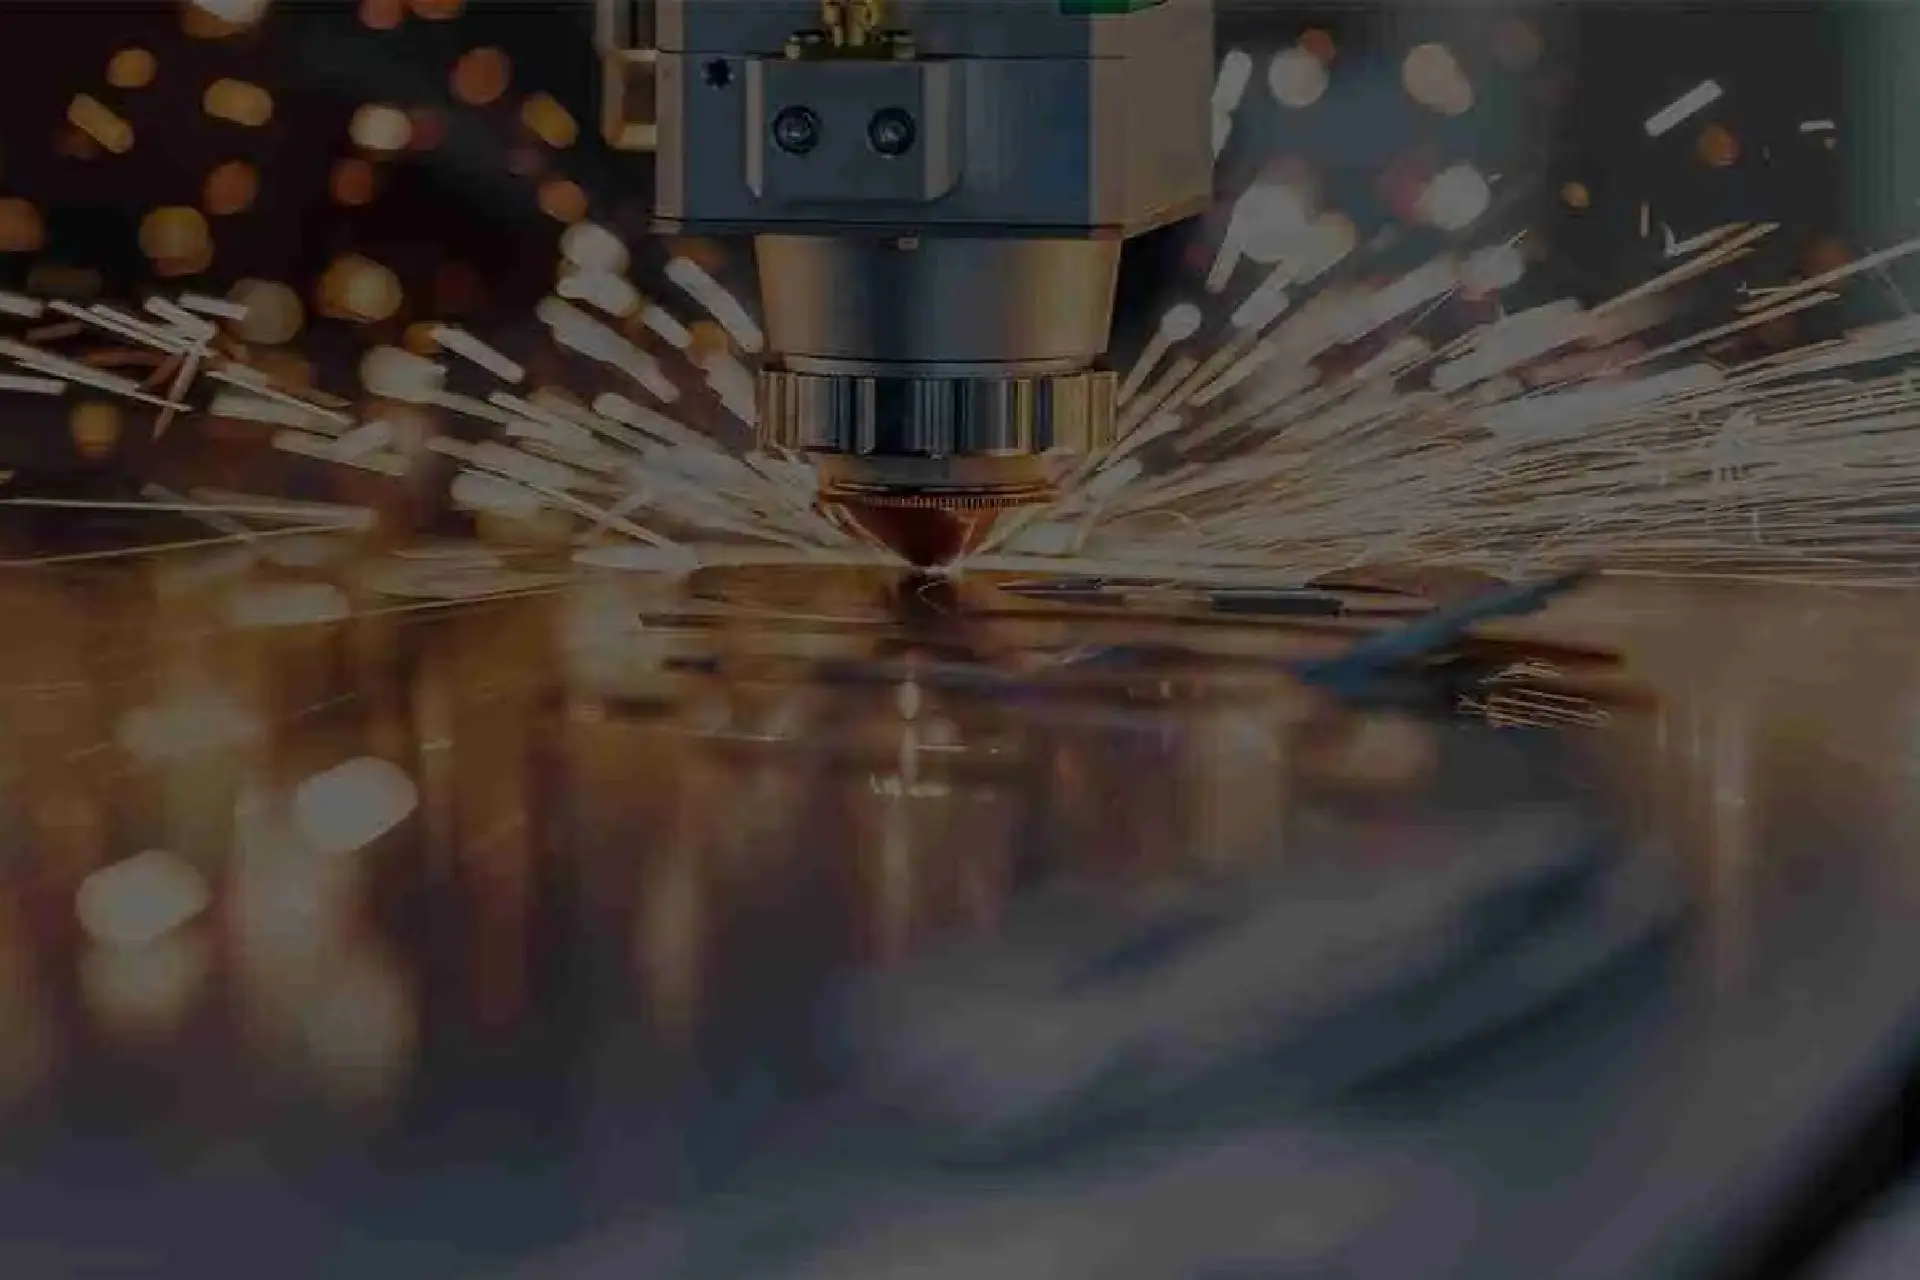 A water jet is being used to cut metal.